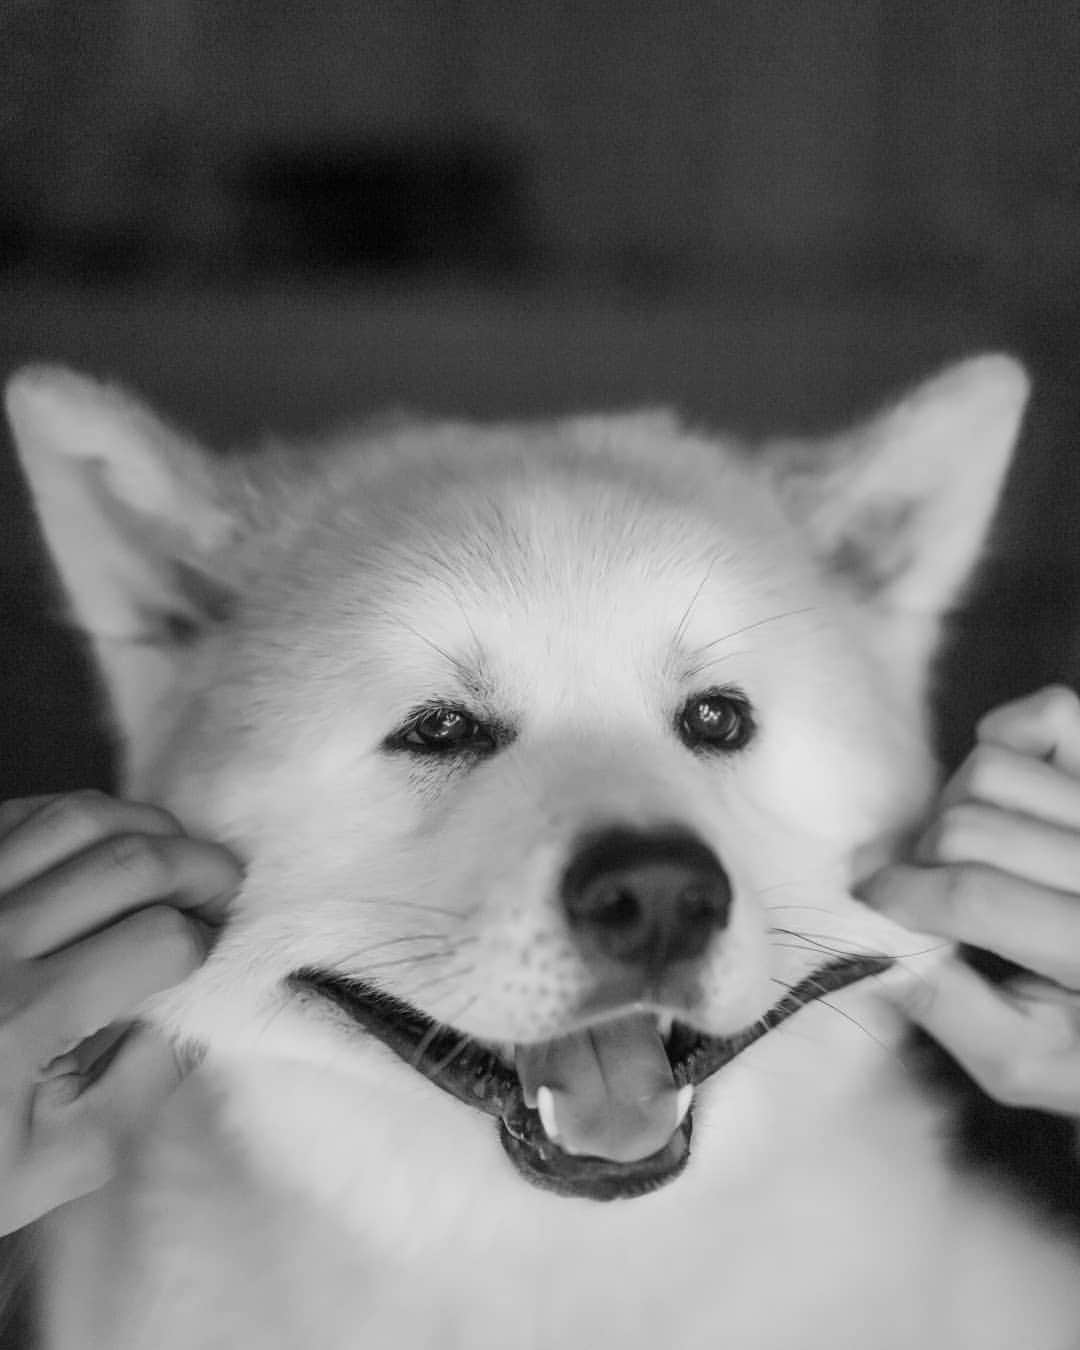 INA. CH KAITO VON JAH SUEDEのインスタグラム：「Silly me 😛😛😛 Awesome Photo by  @esther.asher  @4hour.kairosworks . . . . . . . . . . #akita#akitafeatures#akita_feature#japaneseakita#dog_features#Hatchiko#love#animal#petoftheday#akitaofinstagram#pet#animal#秋田犬#犬#秋田#日本の秋田#日本犬 #大型犬 #日本語 #子犬 #可愛い #doglover#ワンコ大好き倶楽部公式 #photooftheday#akitagram#instapet#dogstagram#dog#puppy#INSTAKITA」